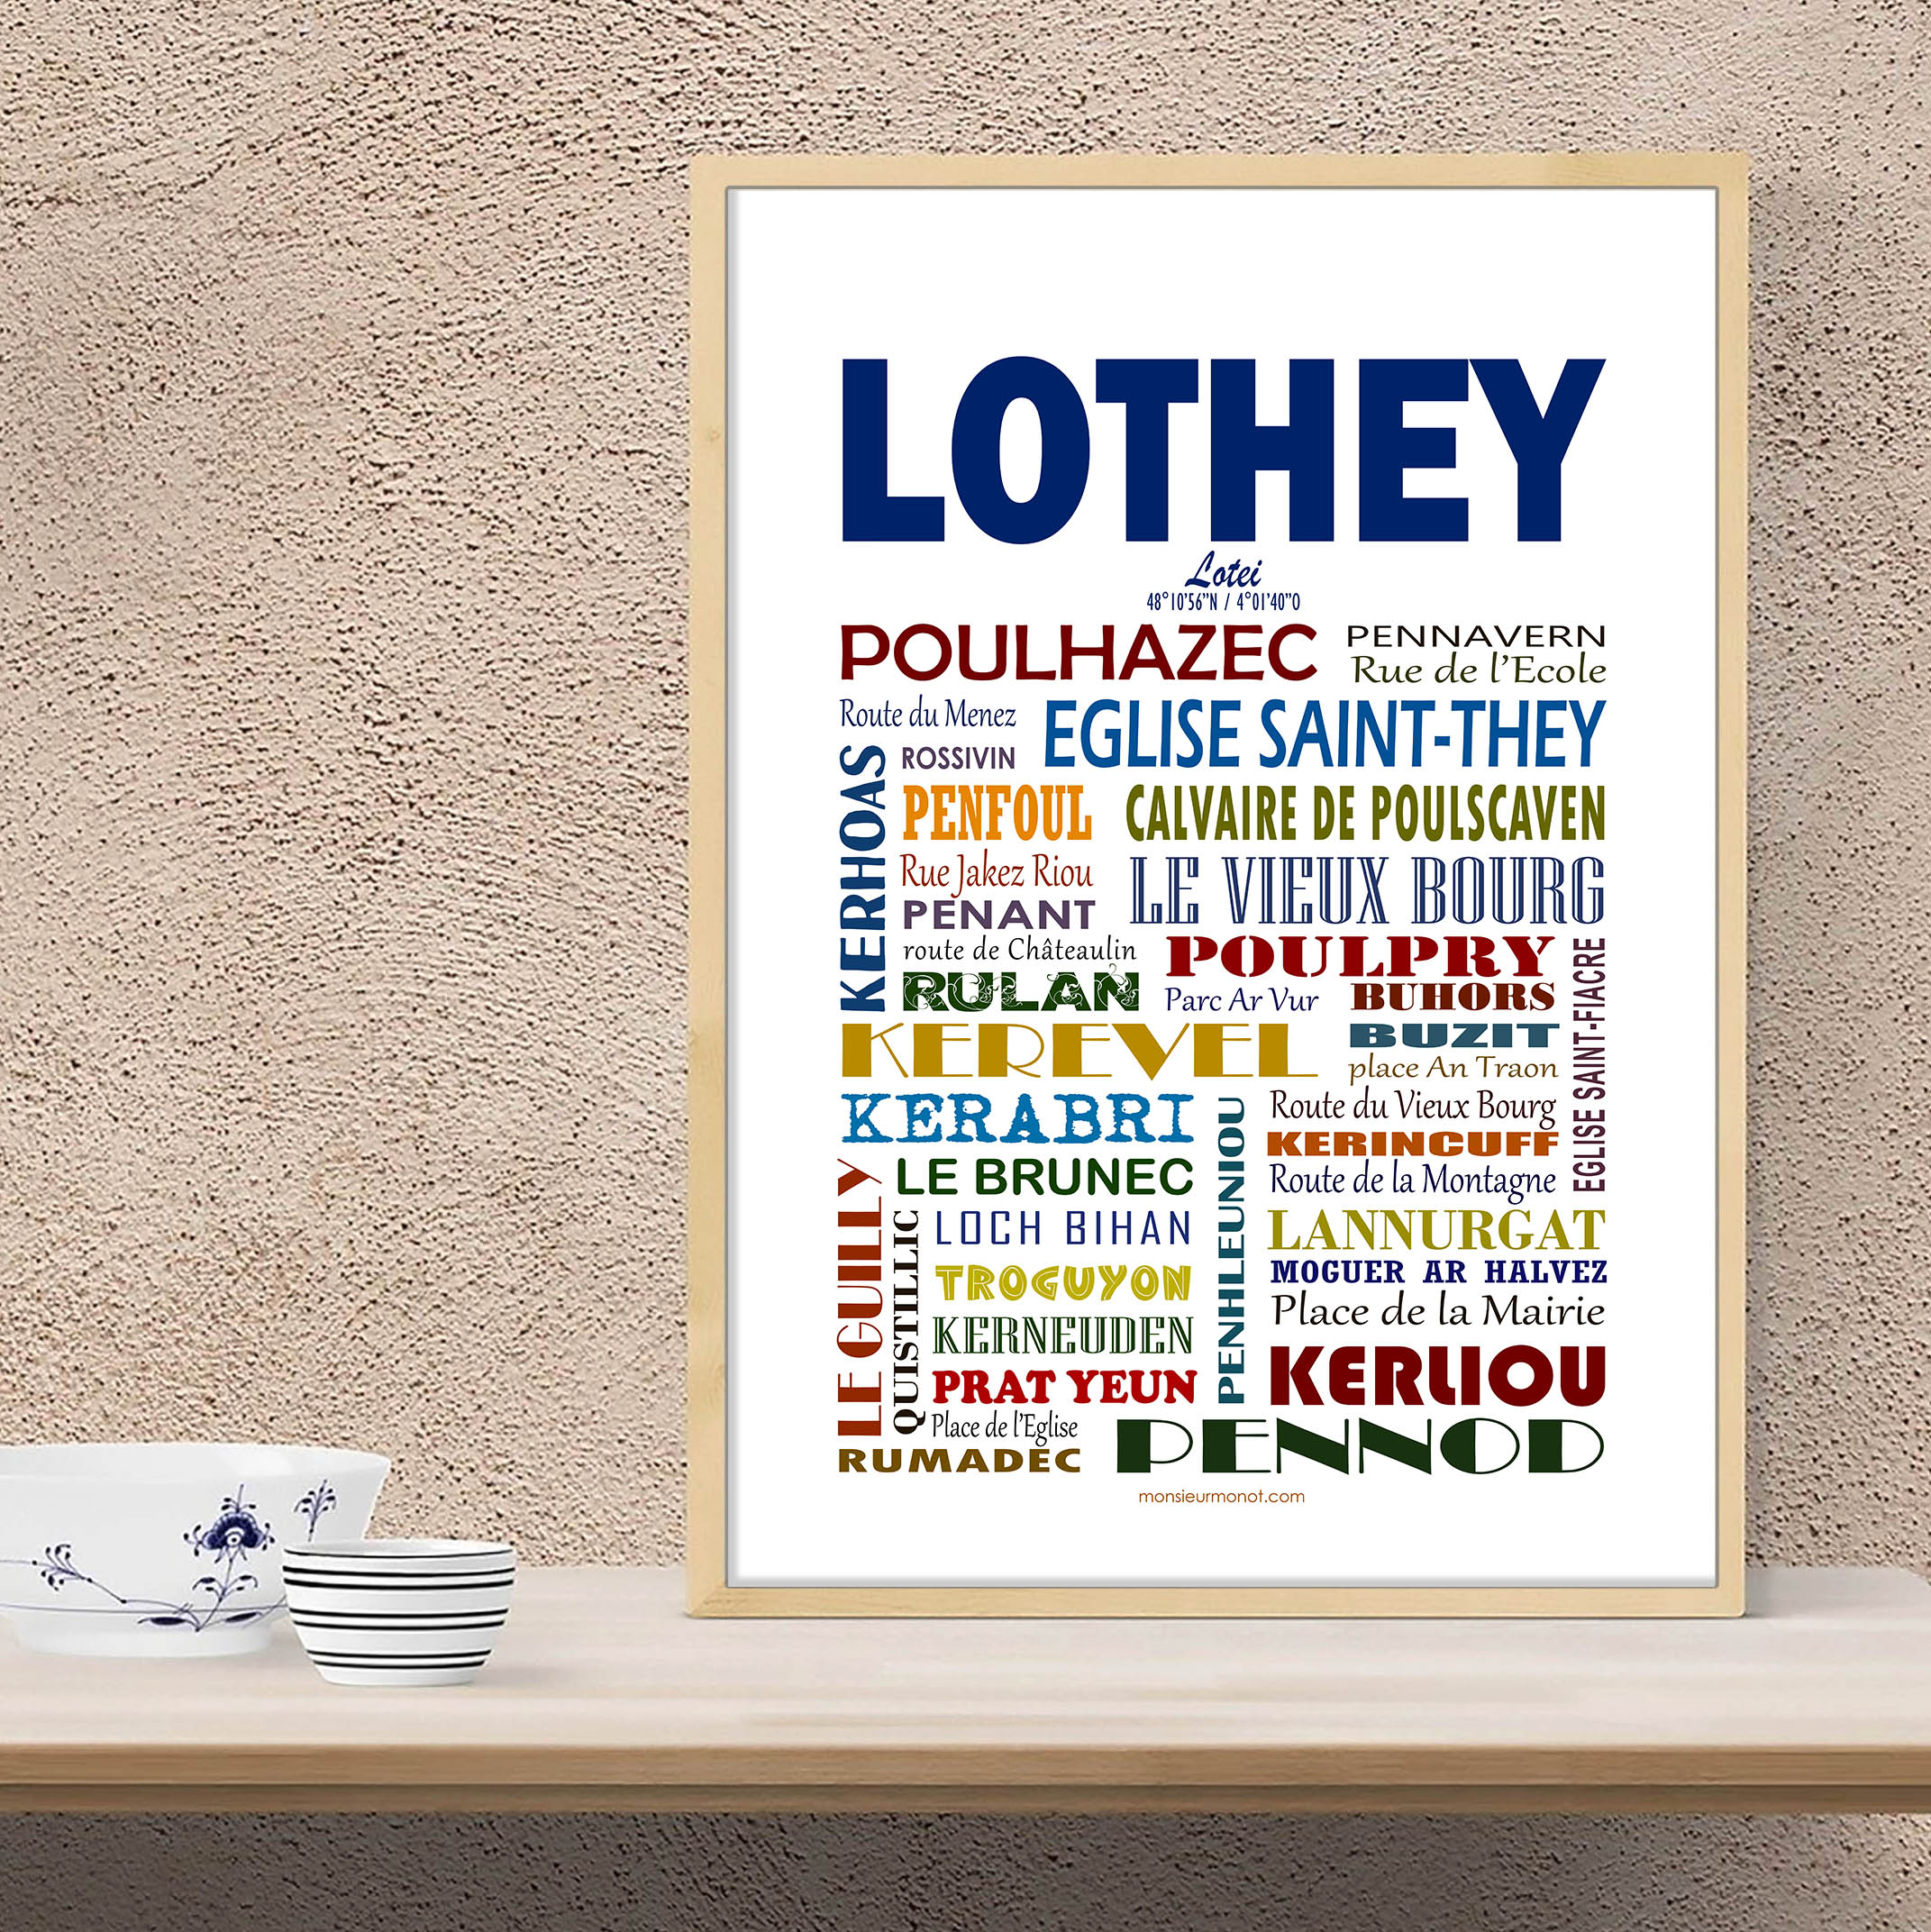 Lothey quartiers 2